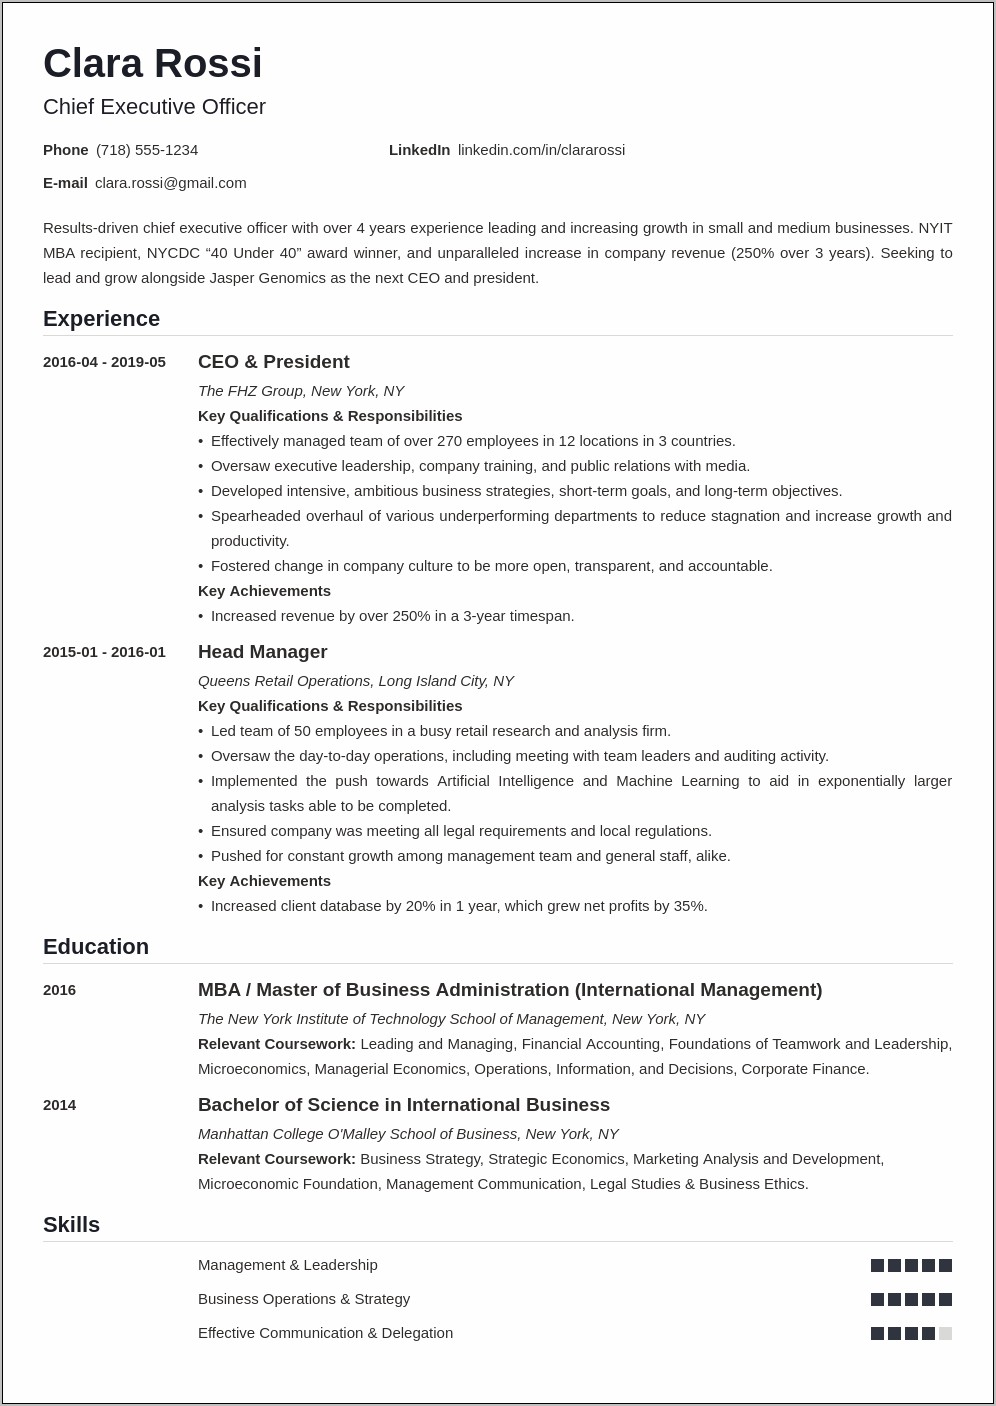 Job Description For Resume Of Small Business Ceo